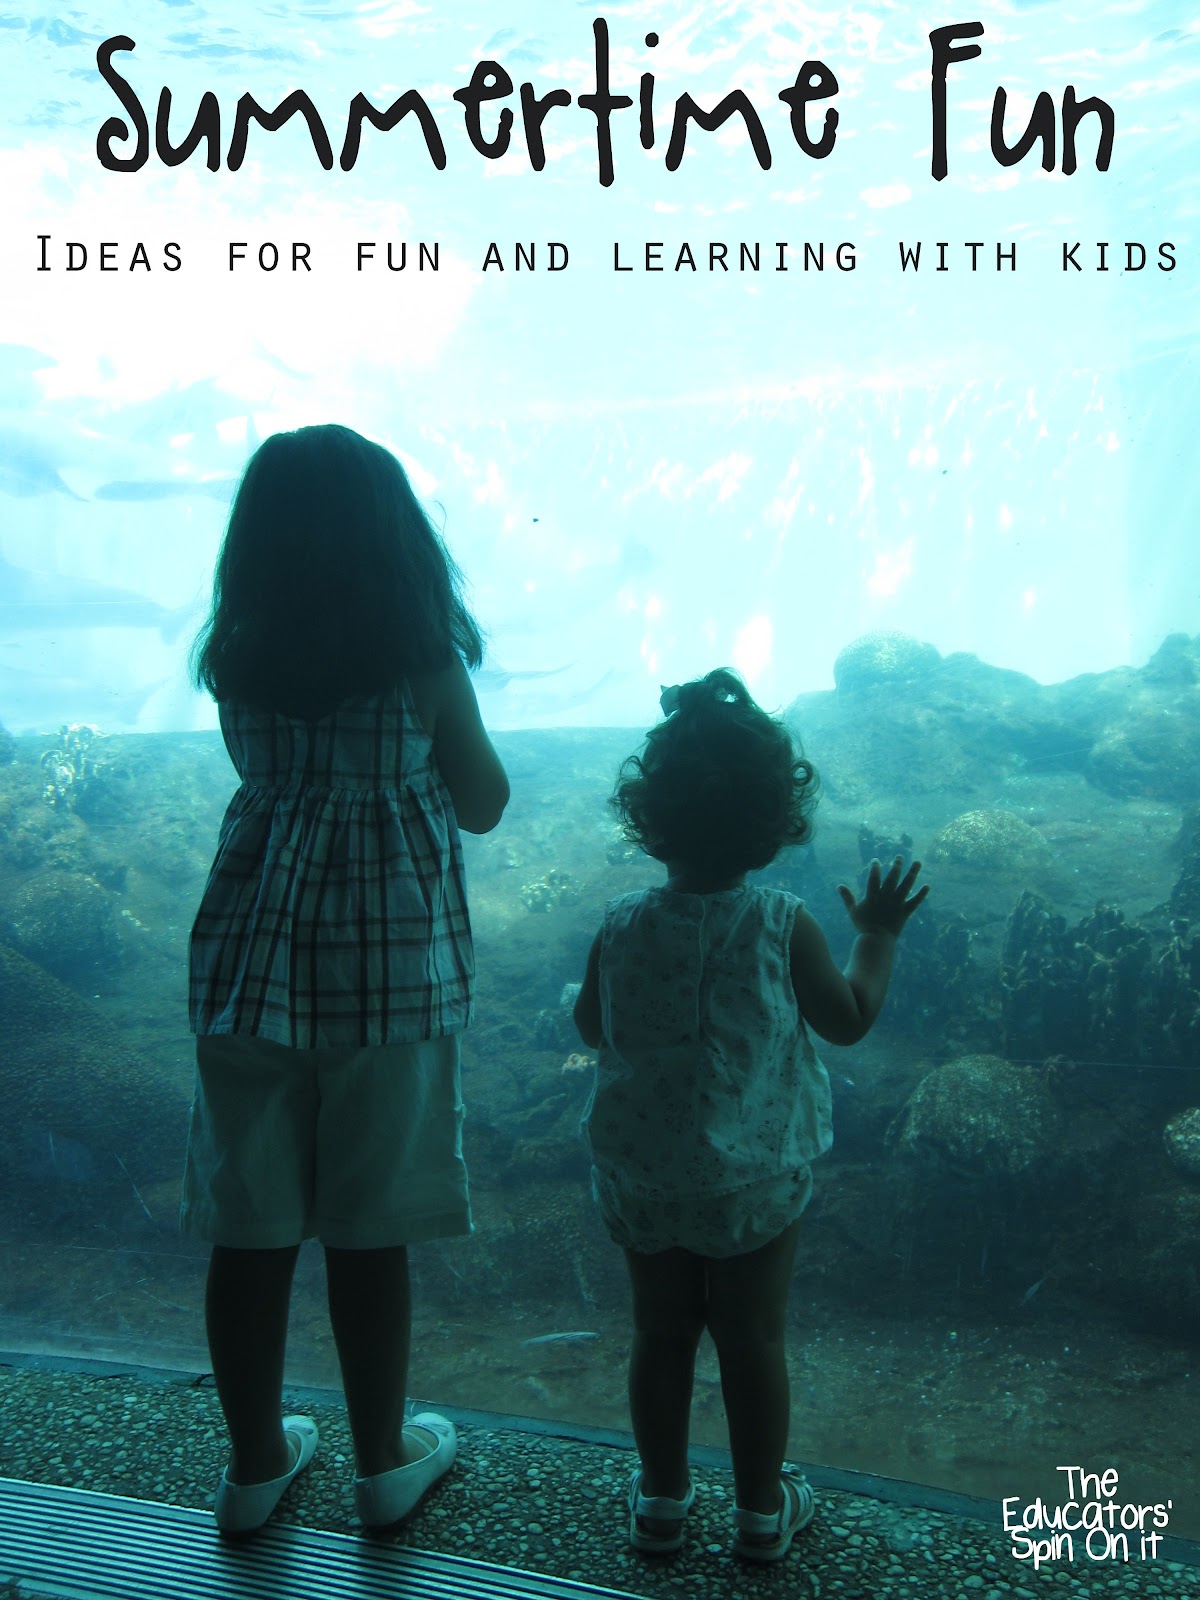 Summer Time Fun with Kids! Ideas for fun and learning this summer with your child.